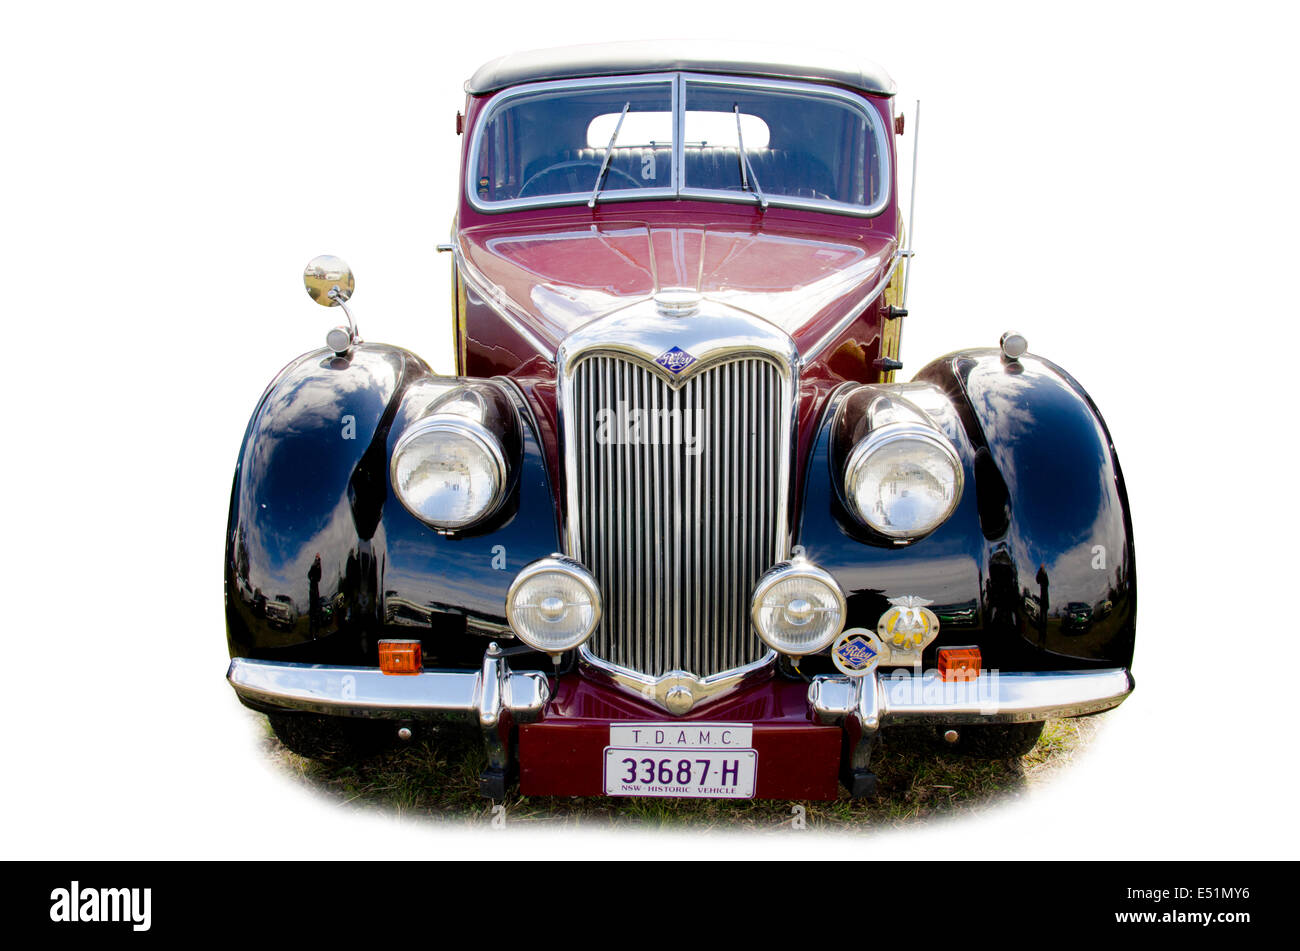 Front view of a 1950s Riley RM saloon car Stock Photo